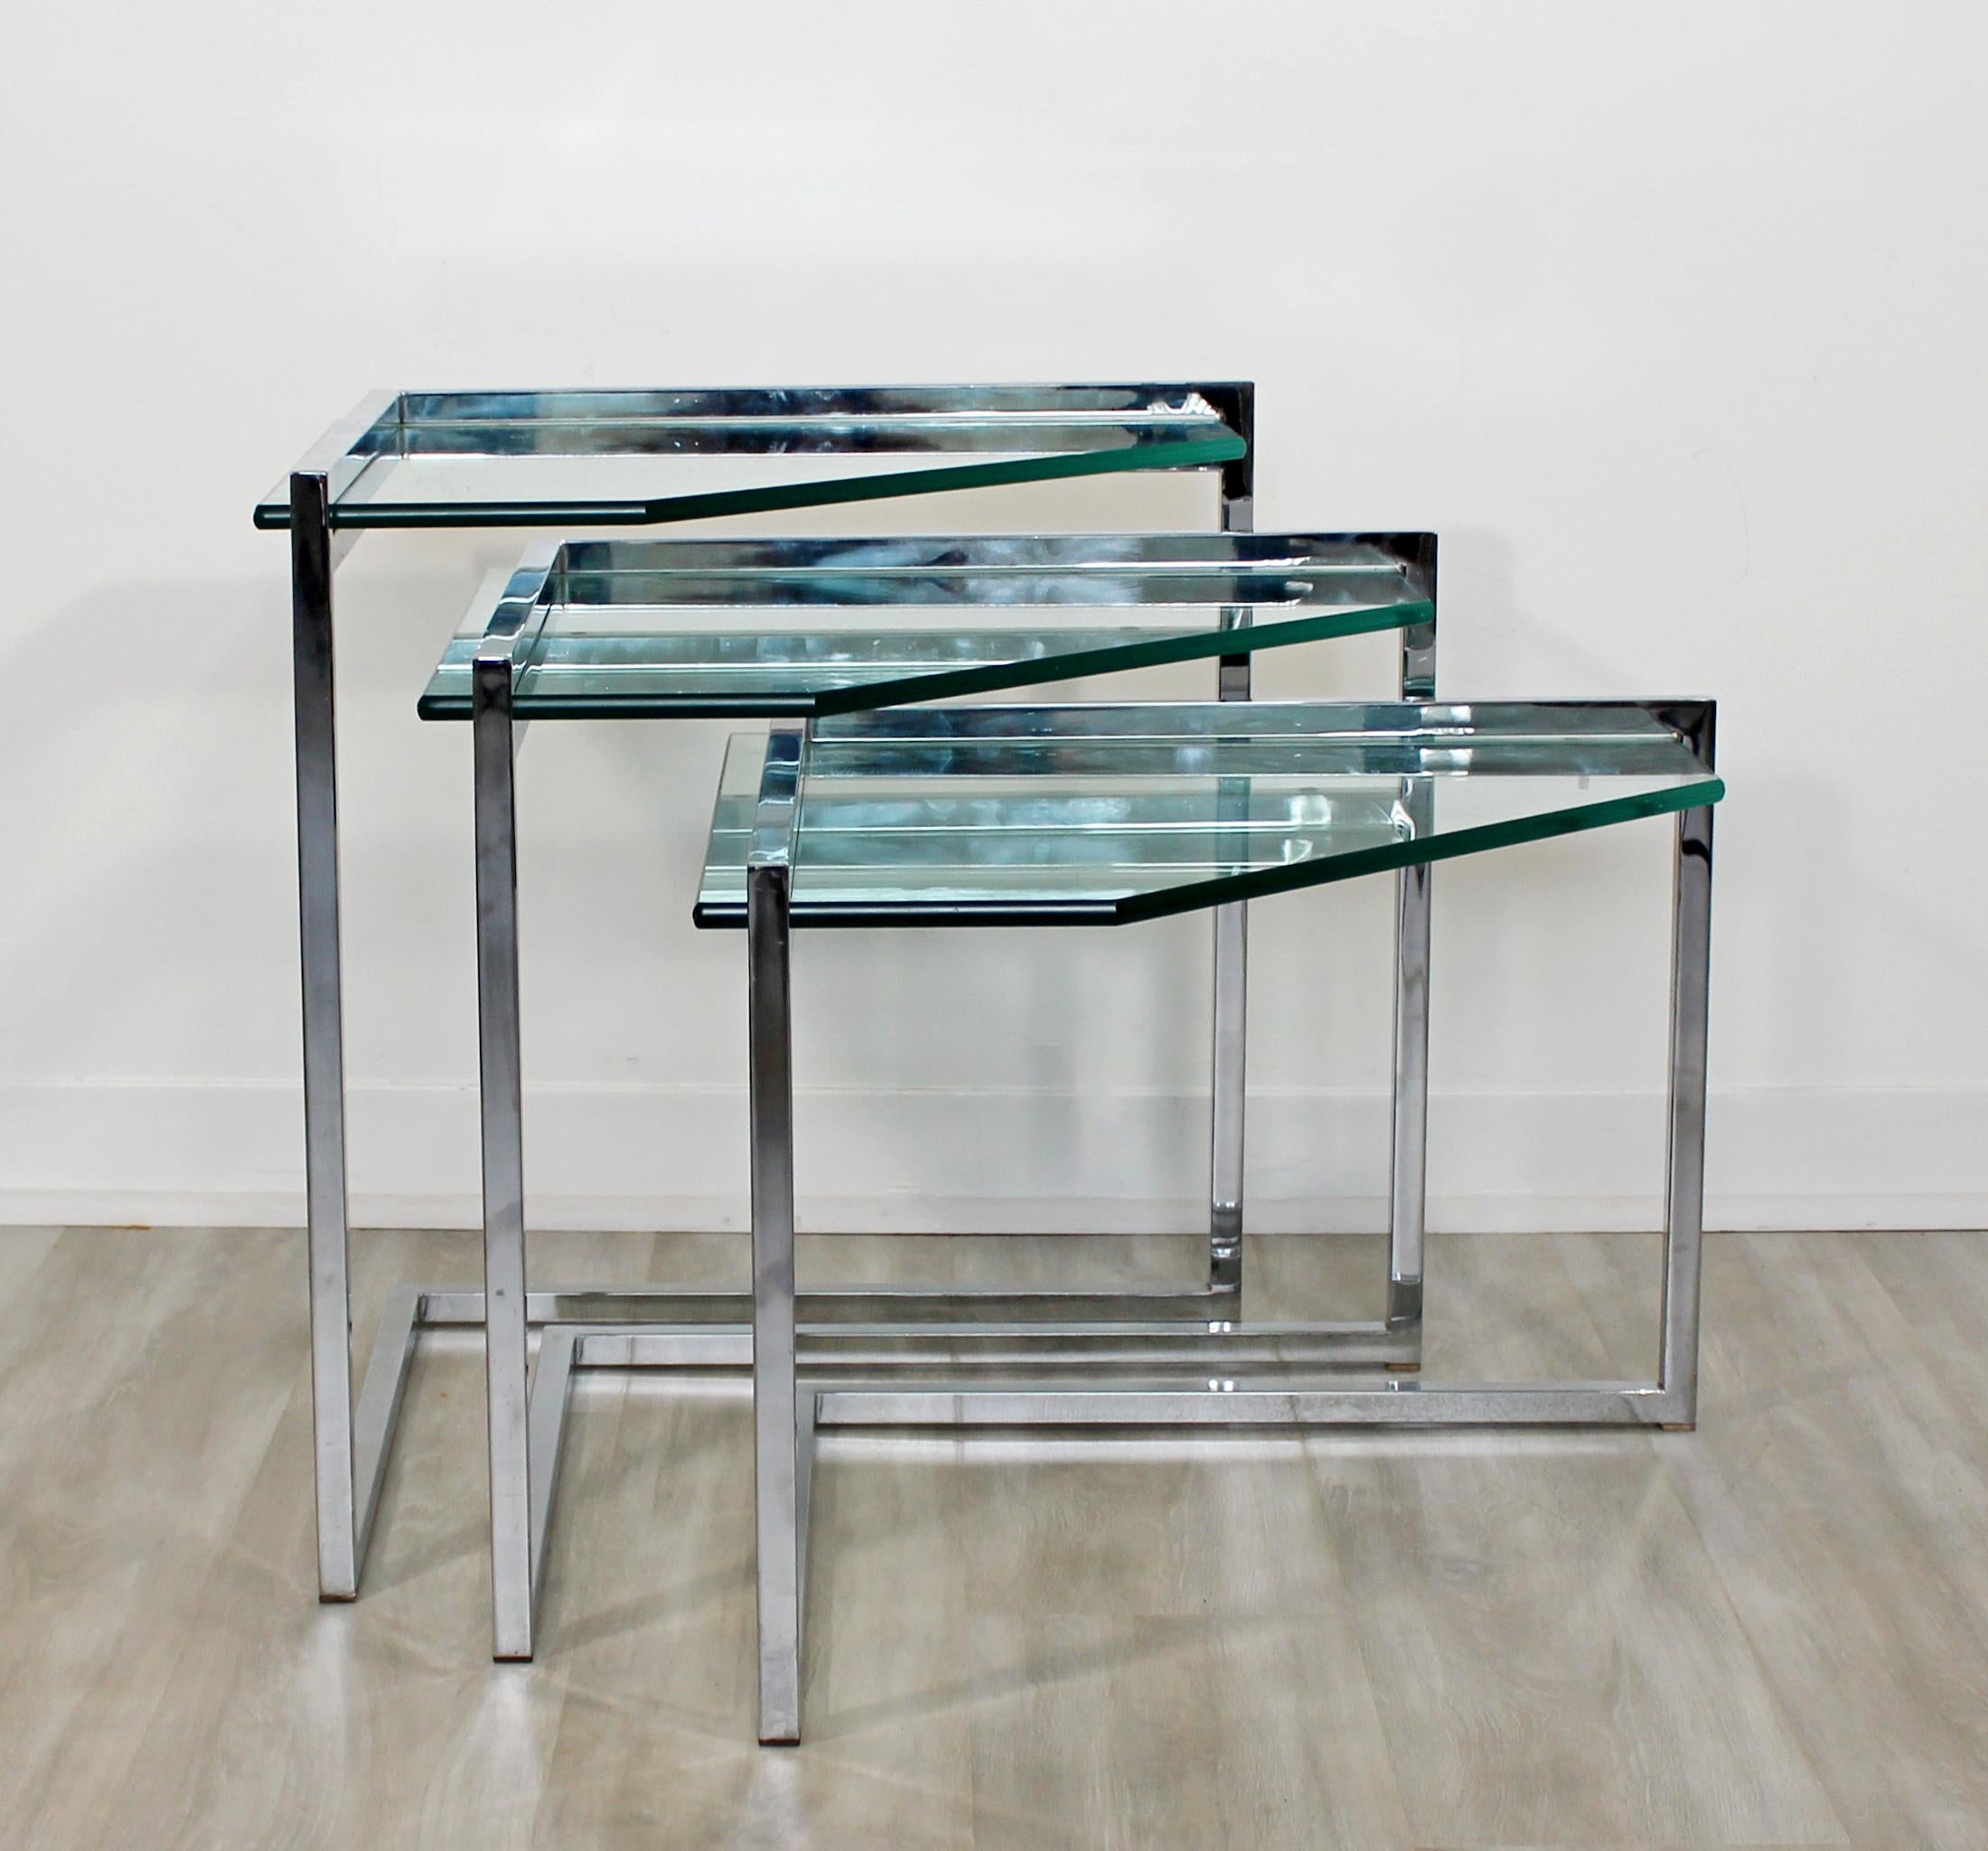 American Mid-Century Modern Set of 3 Nesting Side Tables Cantilever Chrome & Glass, 1970s